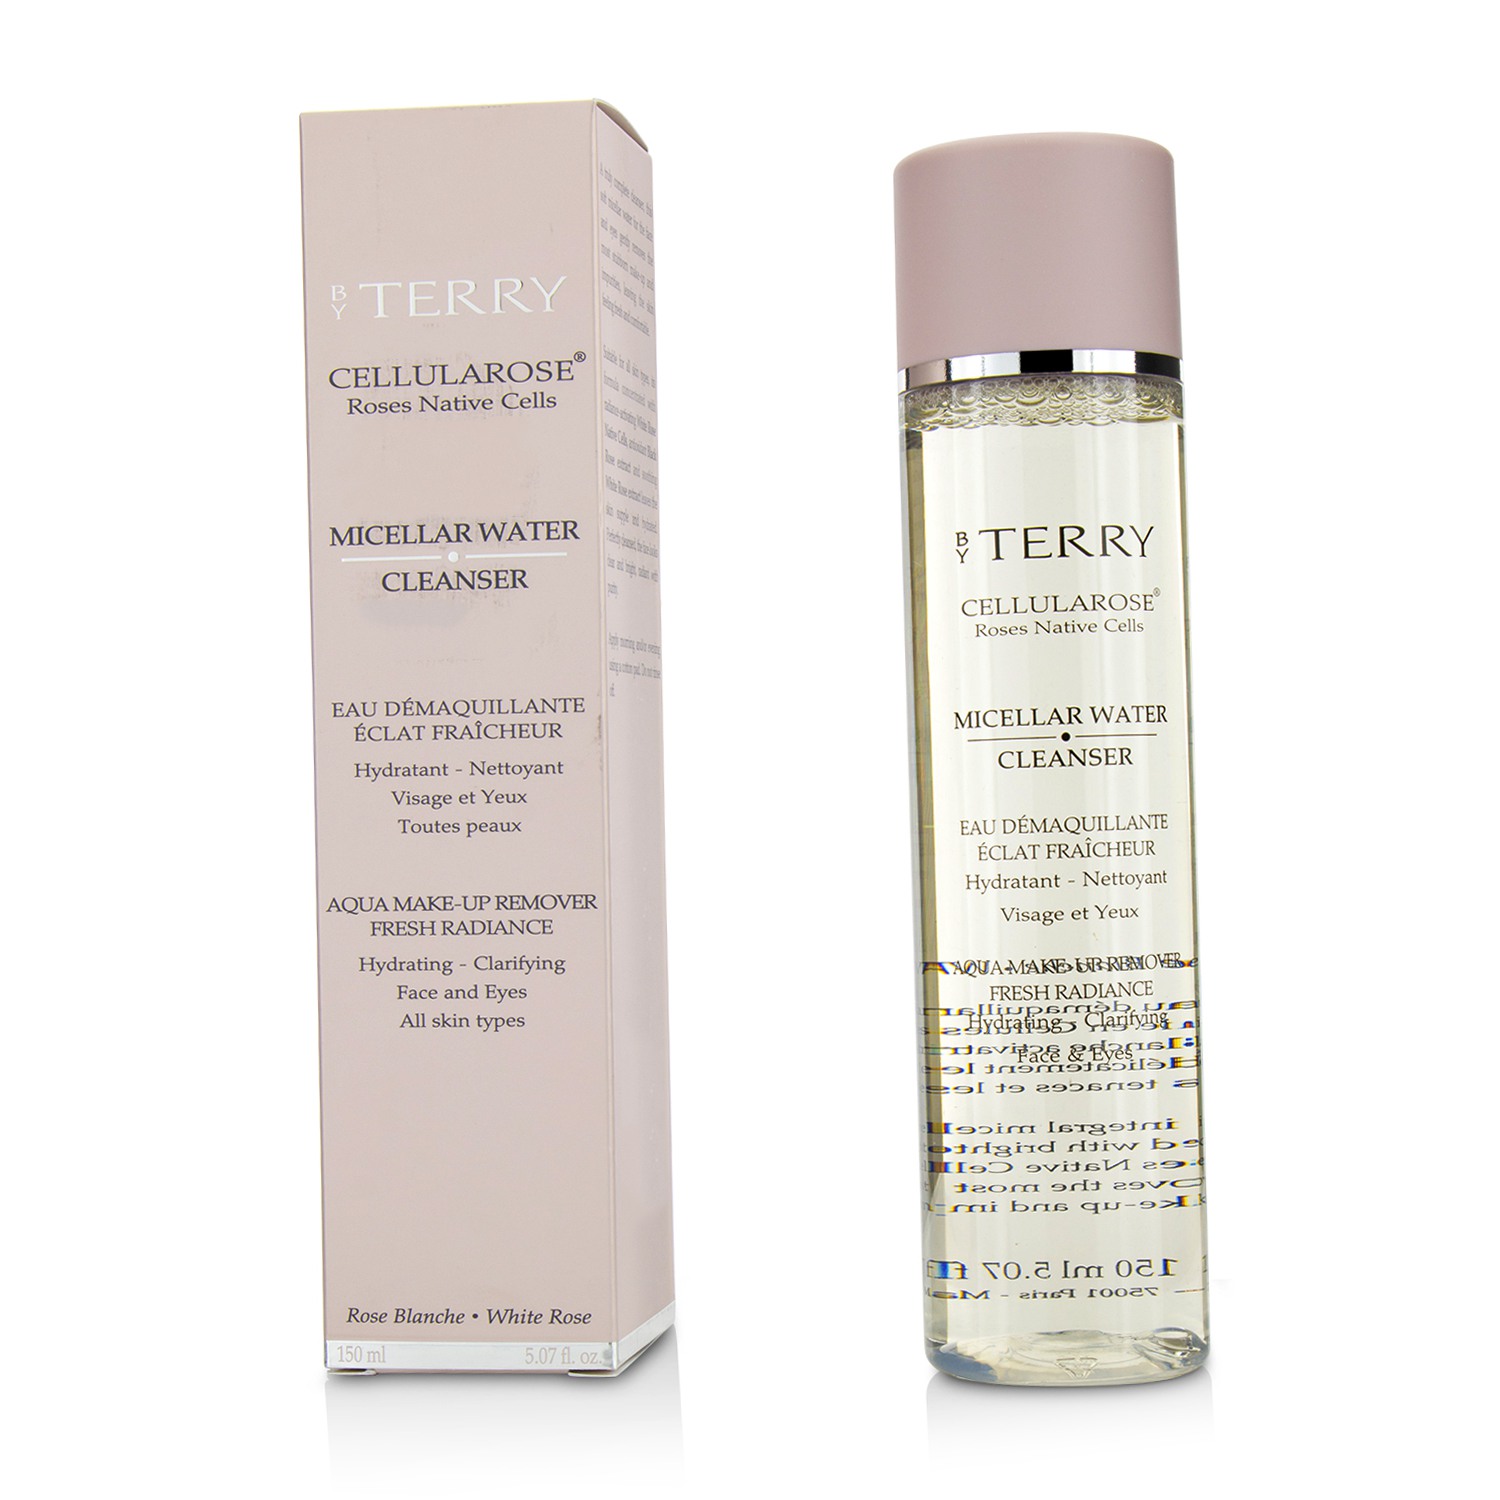 Cellularose Micellar Water Cleanser - For All Skin Types By Terry Image